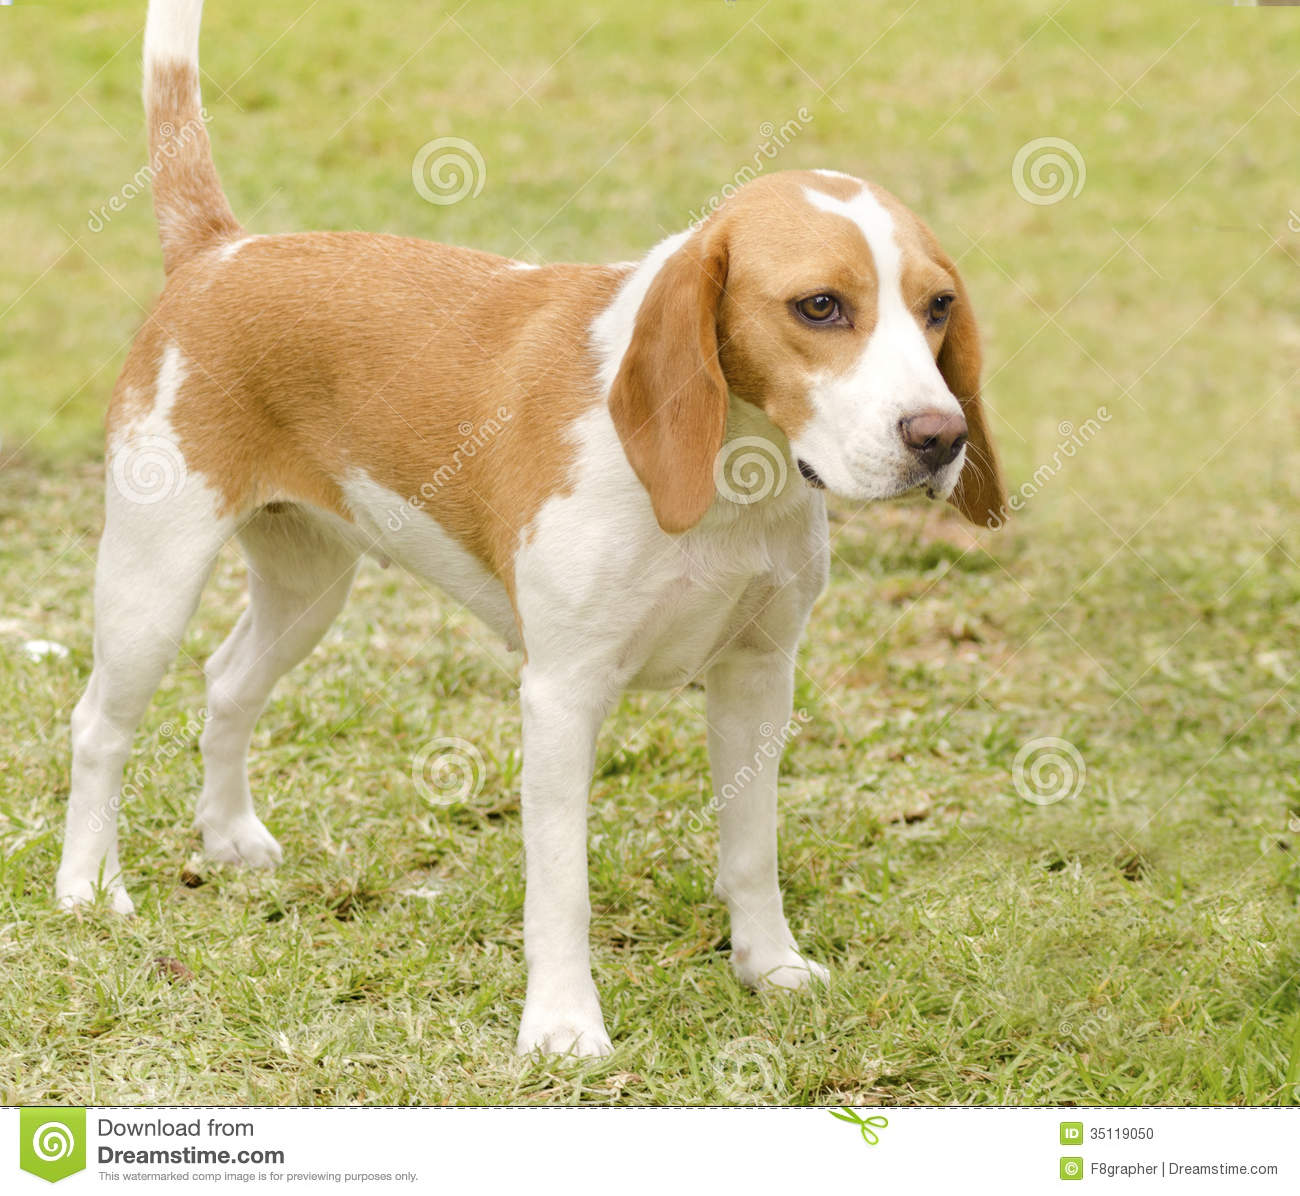 Istrian Shorthaired Hound Dog: Stock Istrian Shorthaired Hound Young Beautiful White Orange Puppy Dog Standing Lawn Short Haired Breed